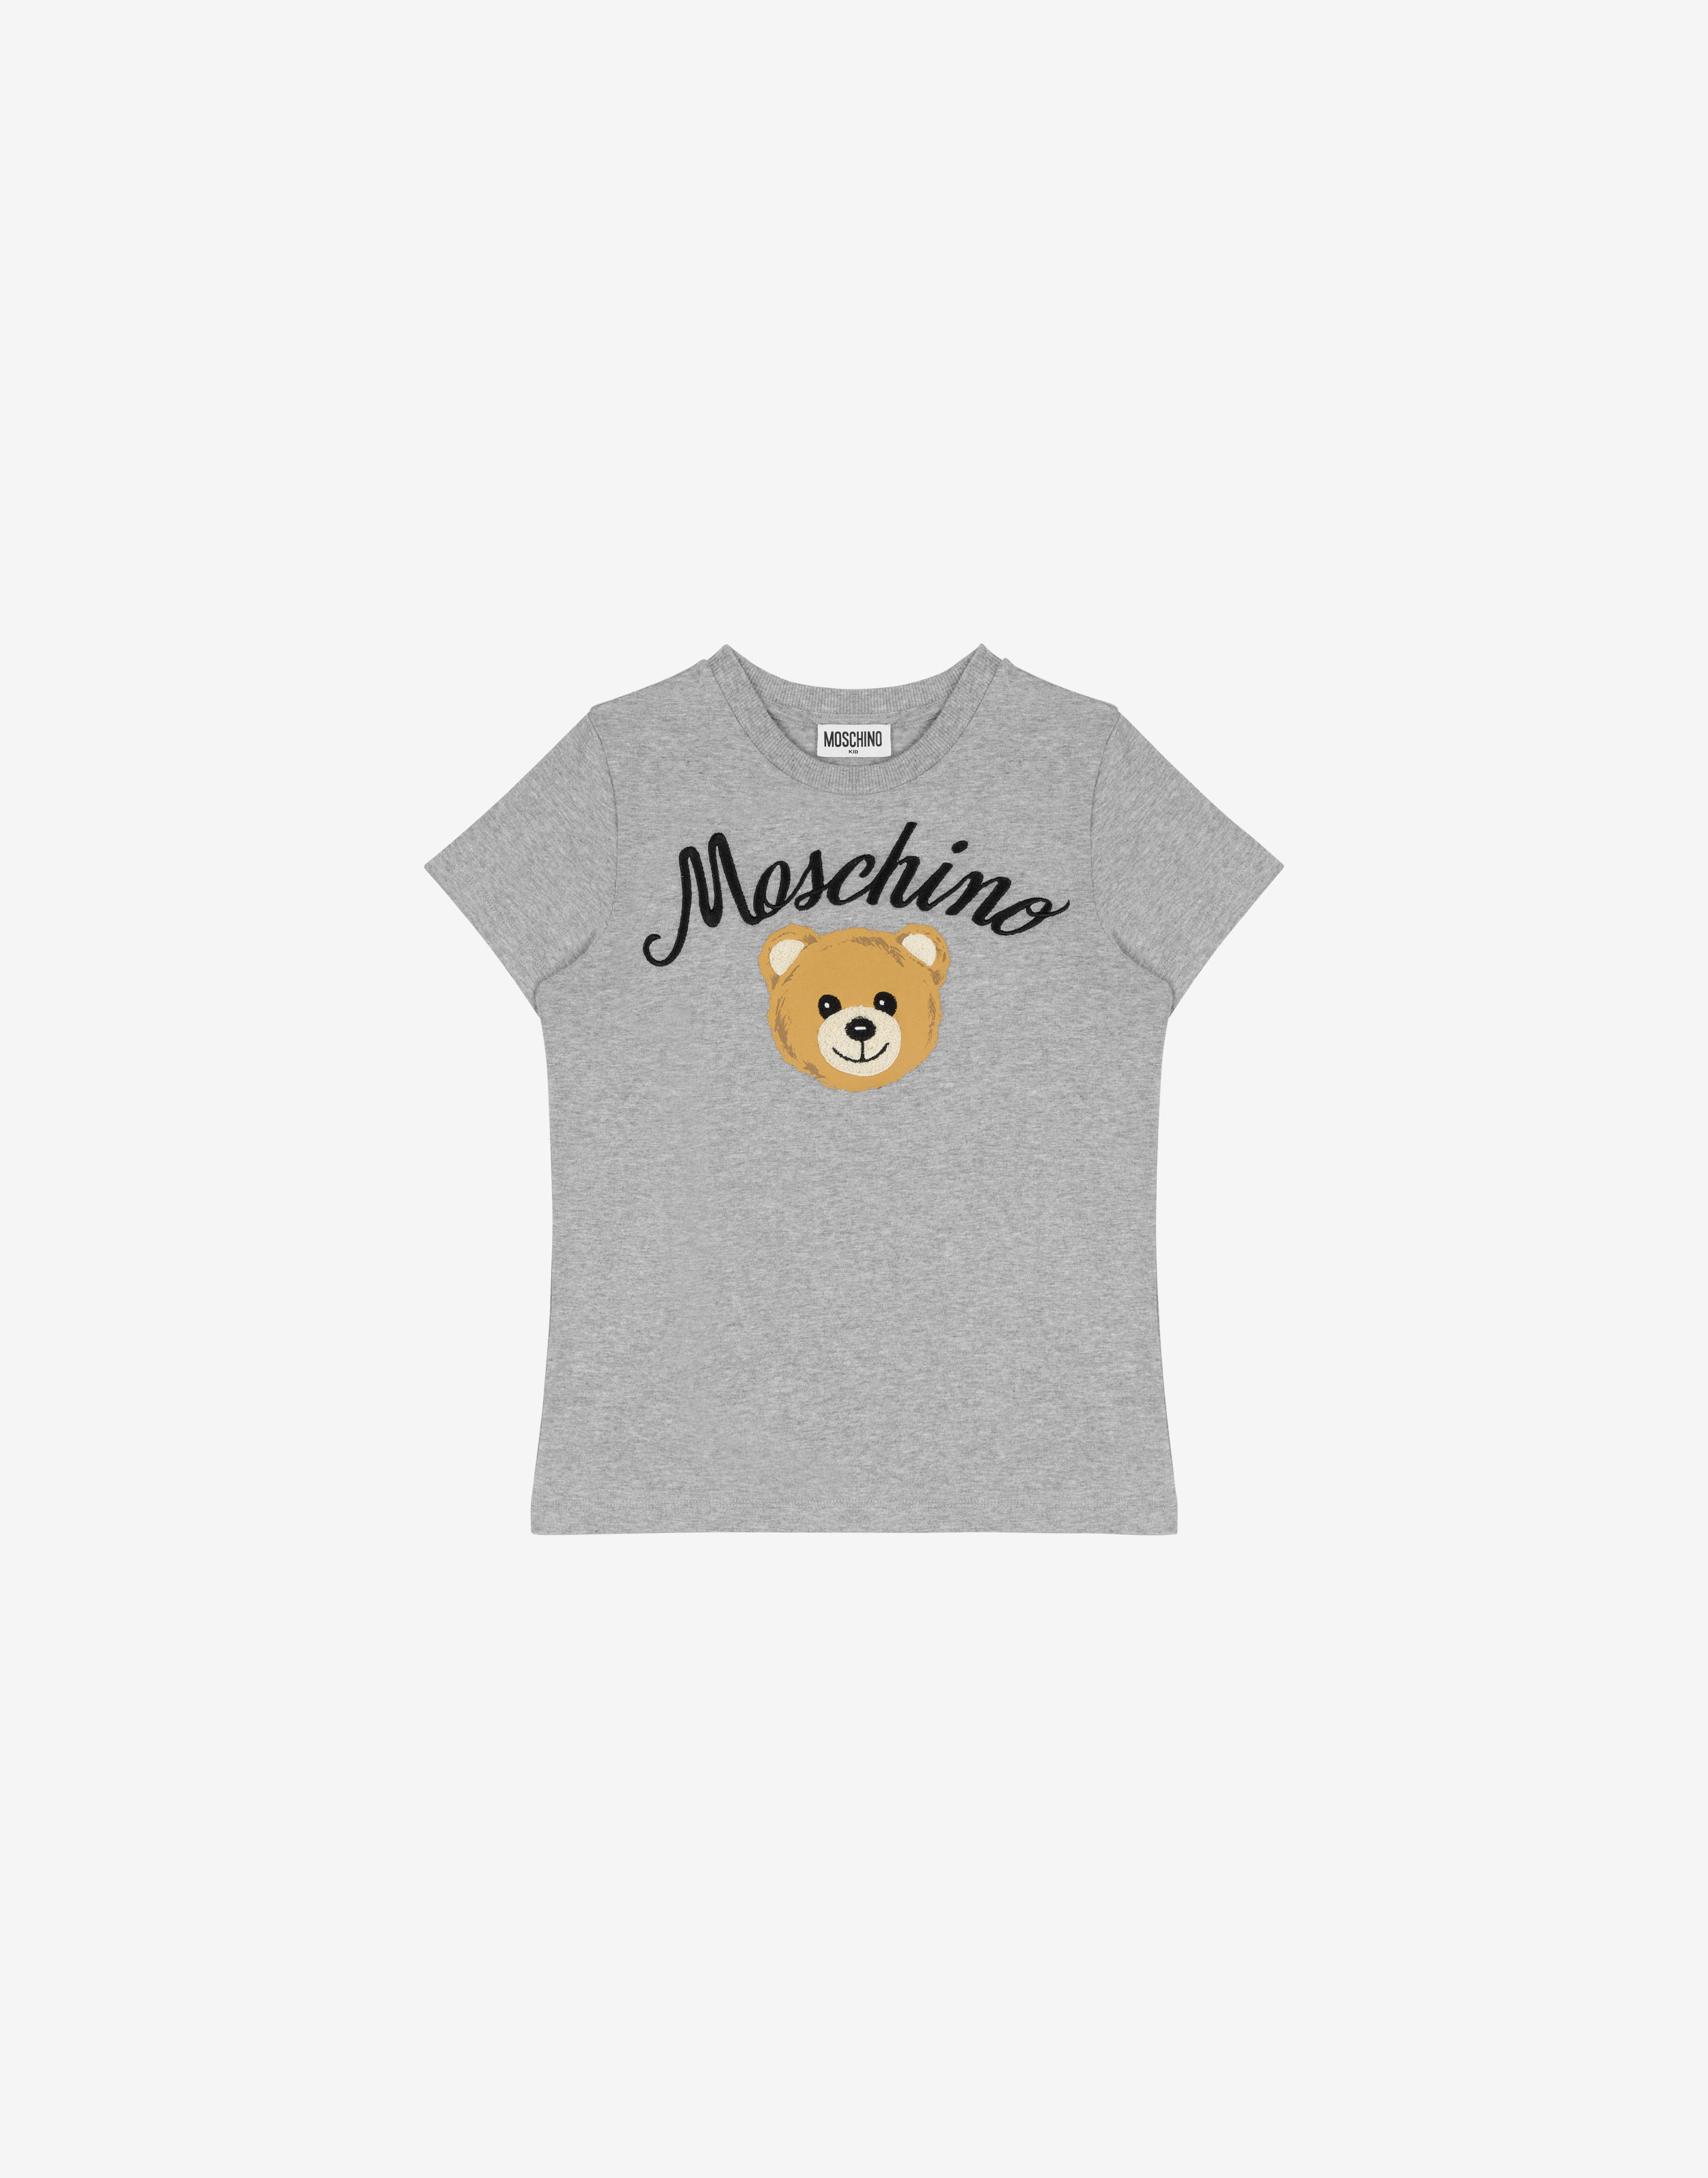 Moschino Girl for Child - Official Store